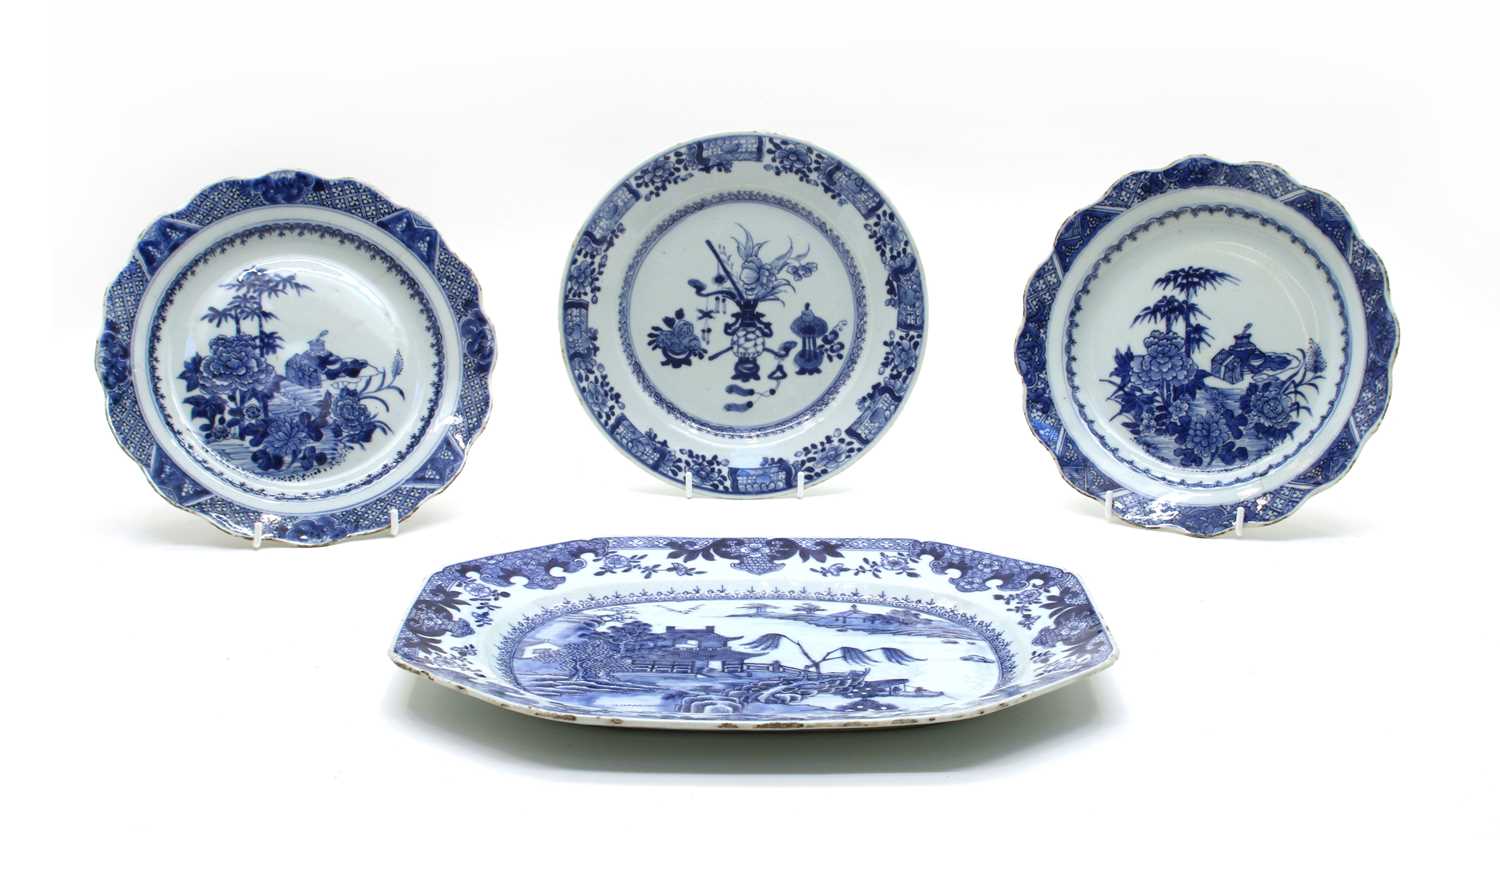 Lot 72 - Seven 19th century Chinese blue and white porcelain plates